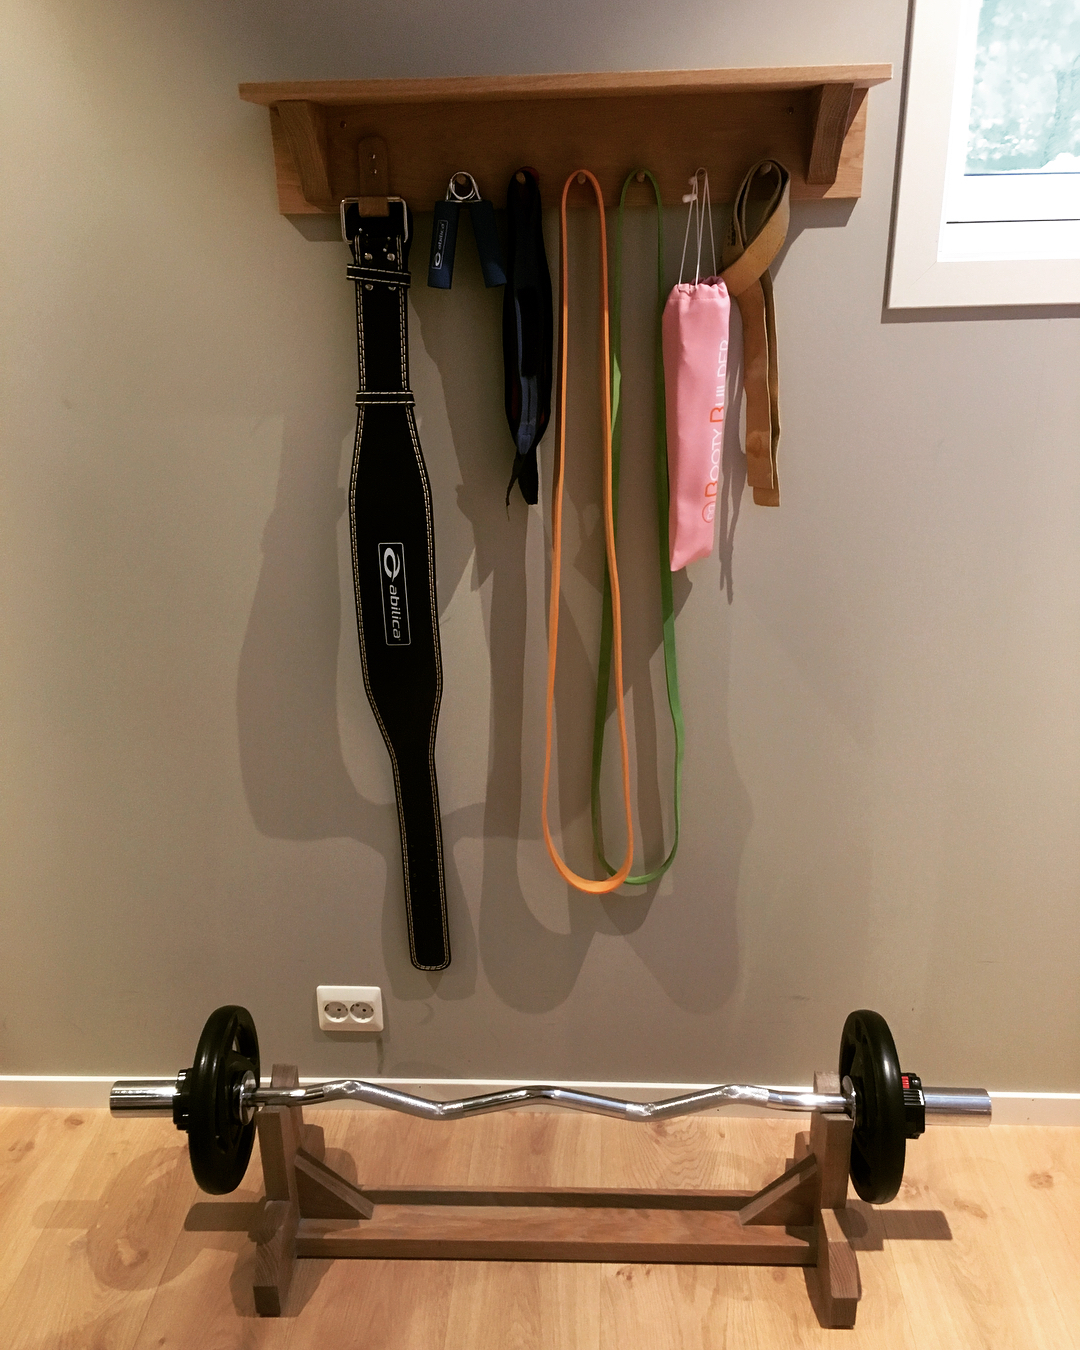 Coat rack with weight belts, resistance bands in home fitness room. Photo by Instagram user @frodet_